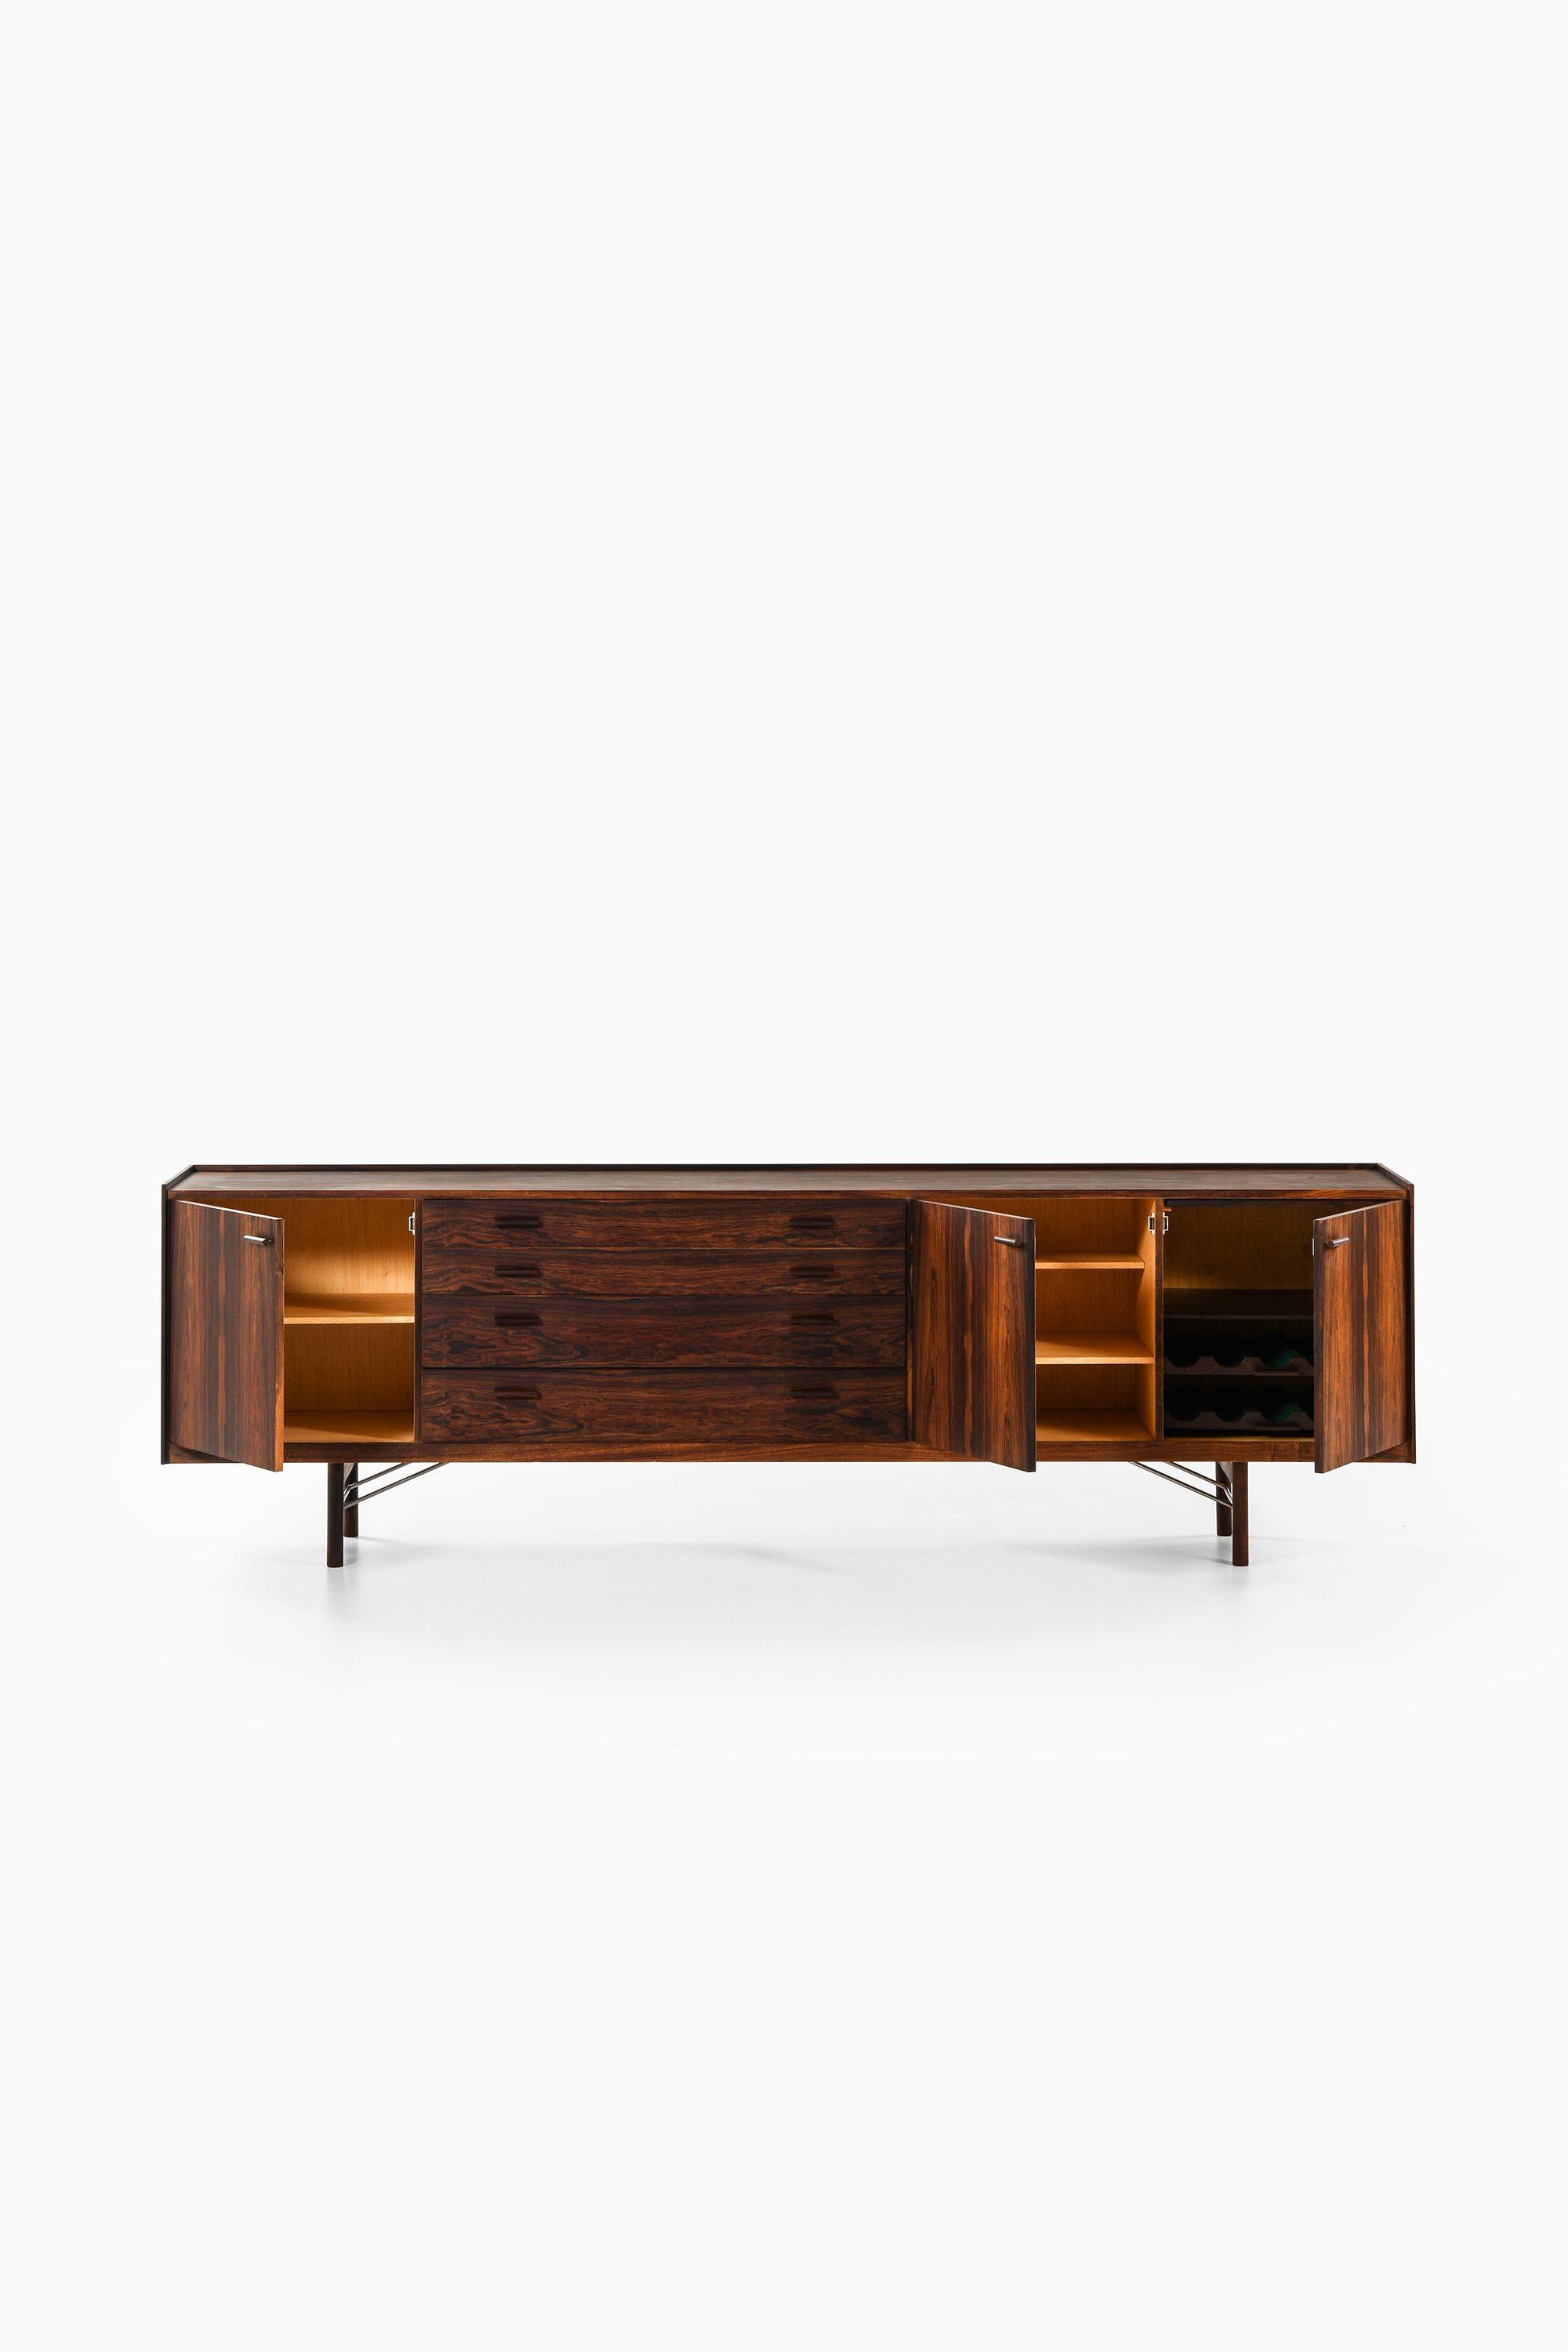 Danish Sideboard in Rosewood and Steel by Ib Kofod-Larsen, 1960s For Sale